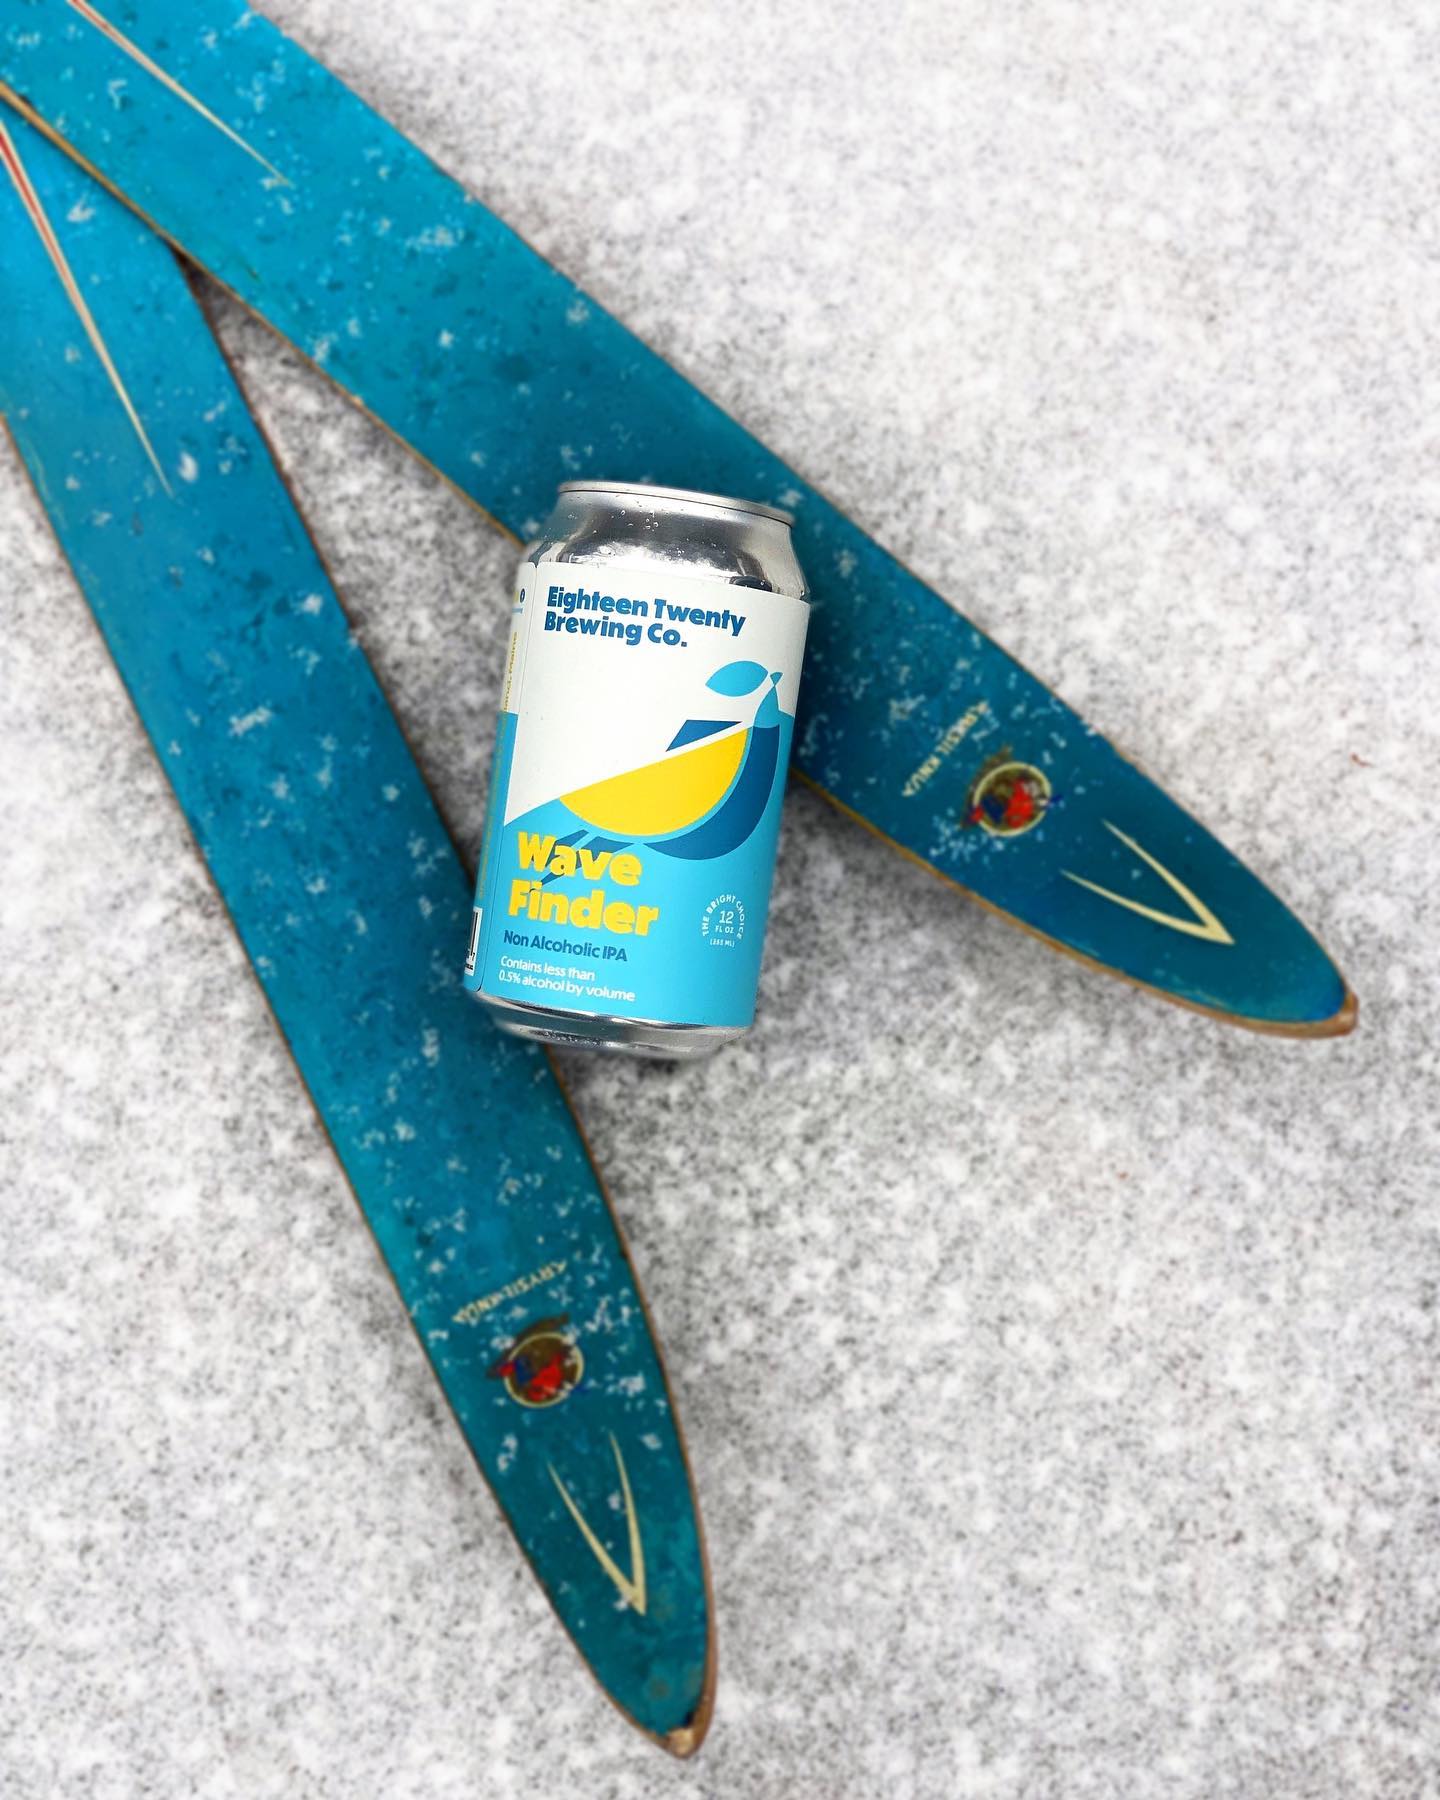 A can of Wave Finder on a pair of skis in the snow.